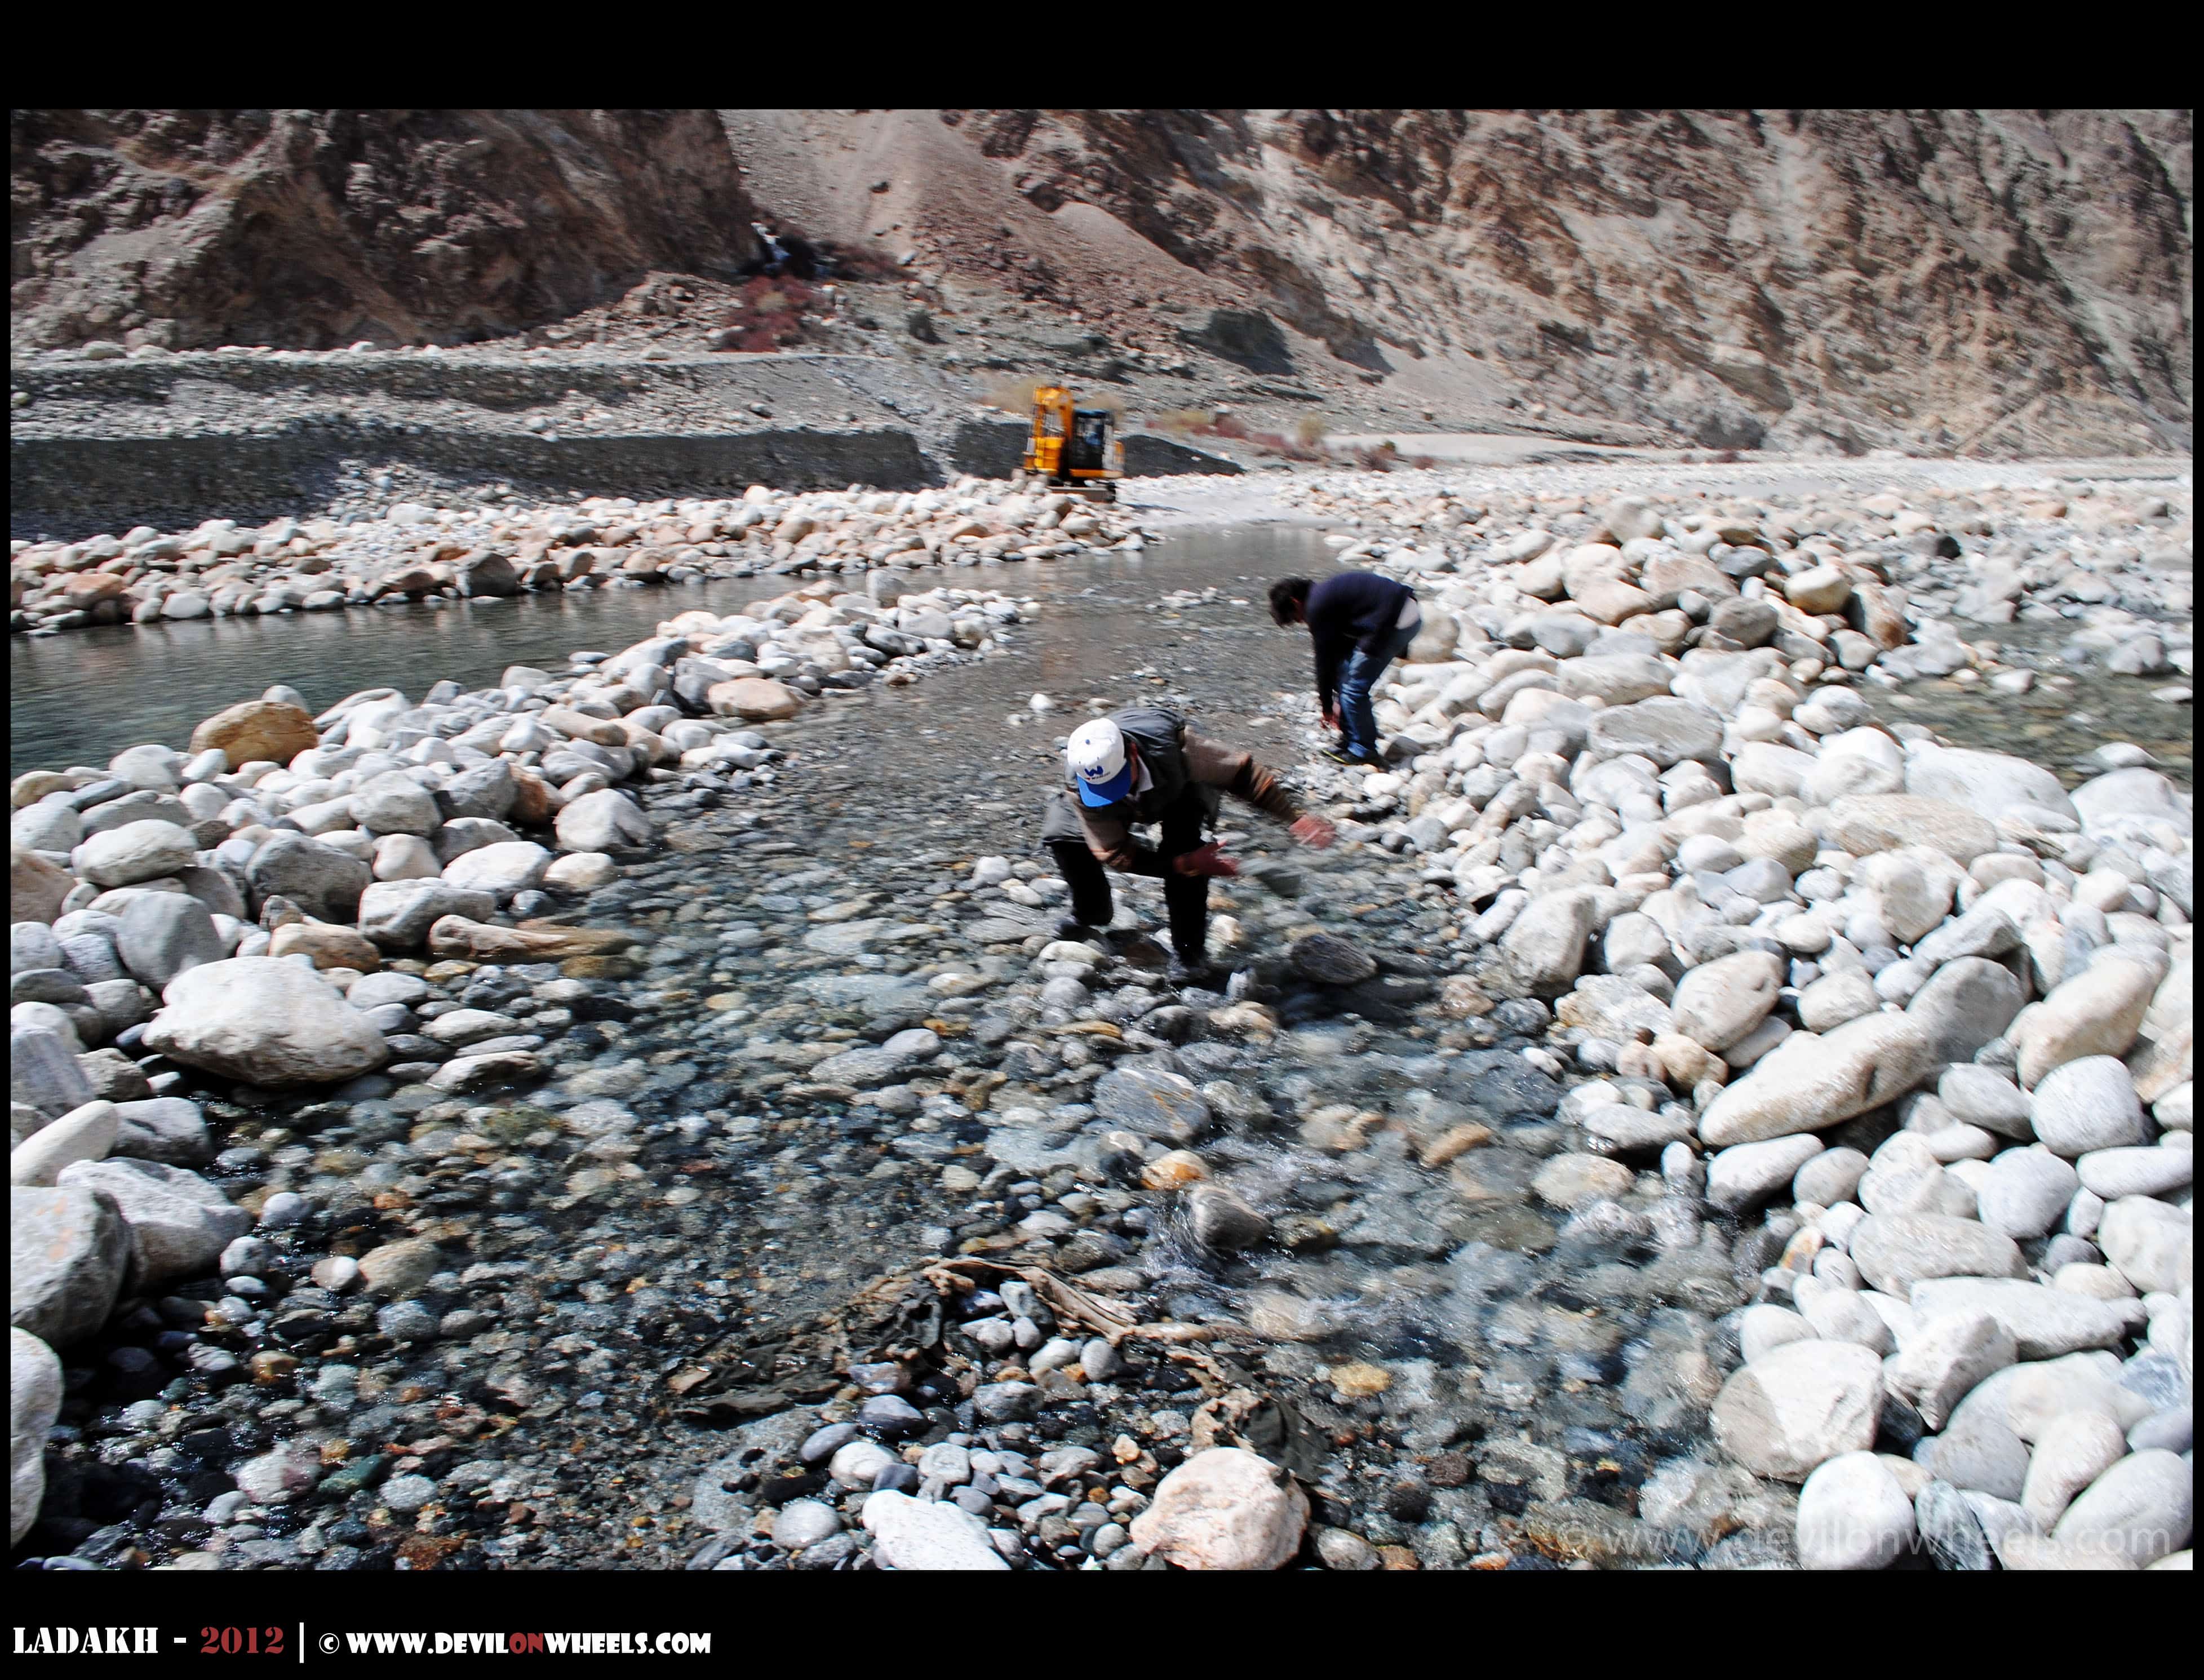 Yes, I know - Traveling to Ladakh ain't that easy as it looks...